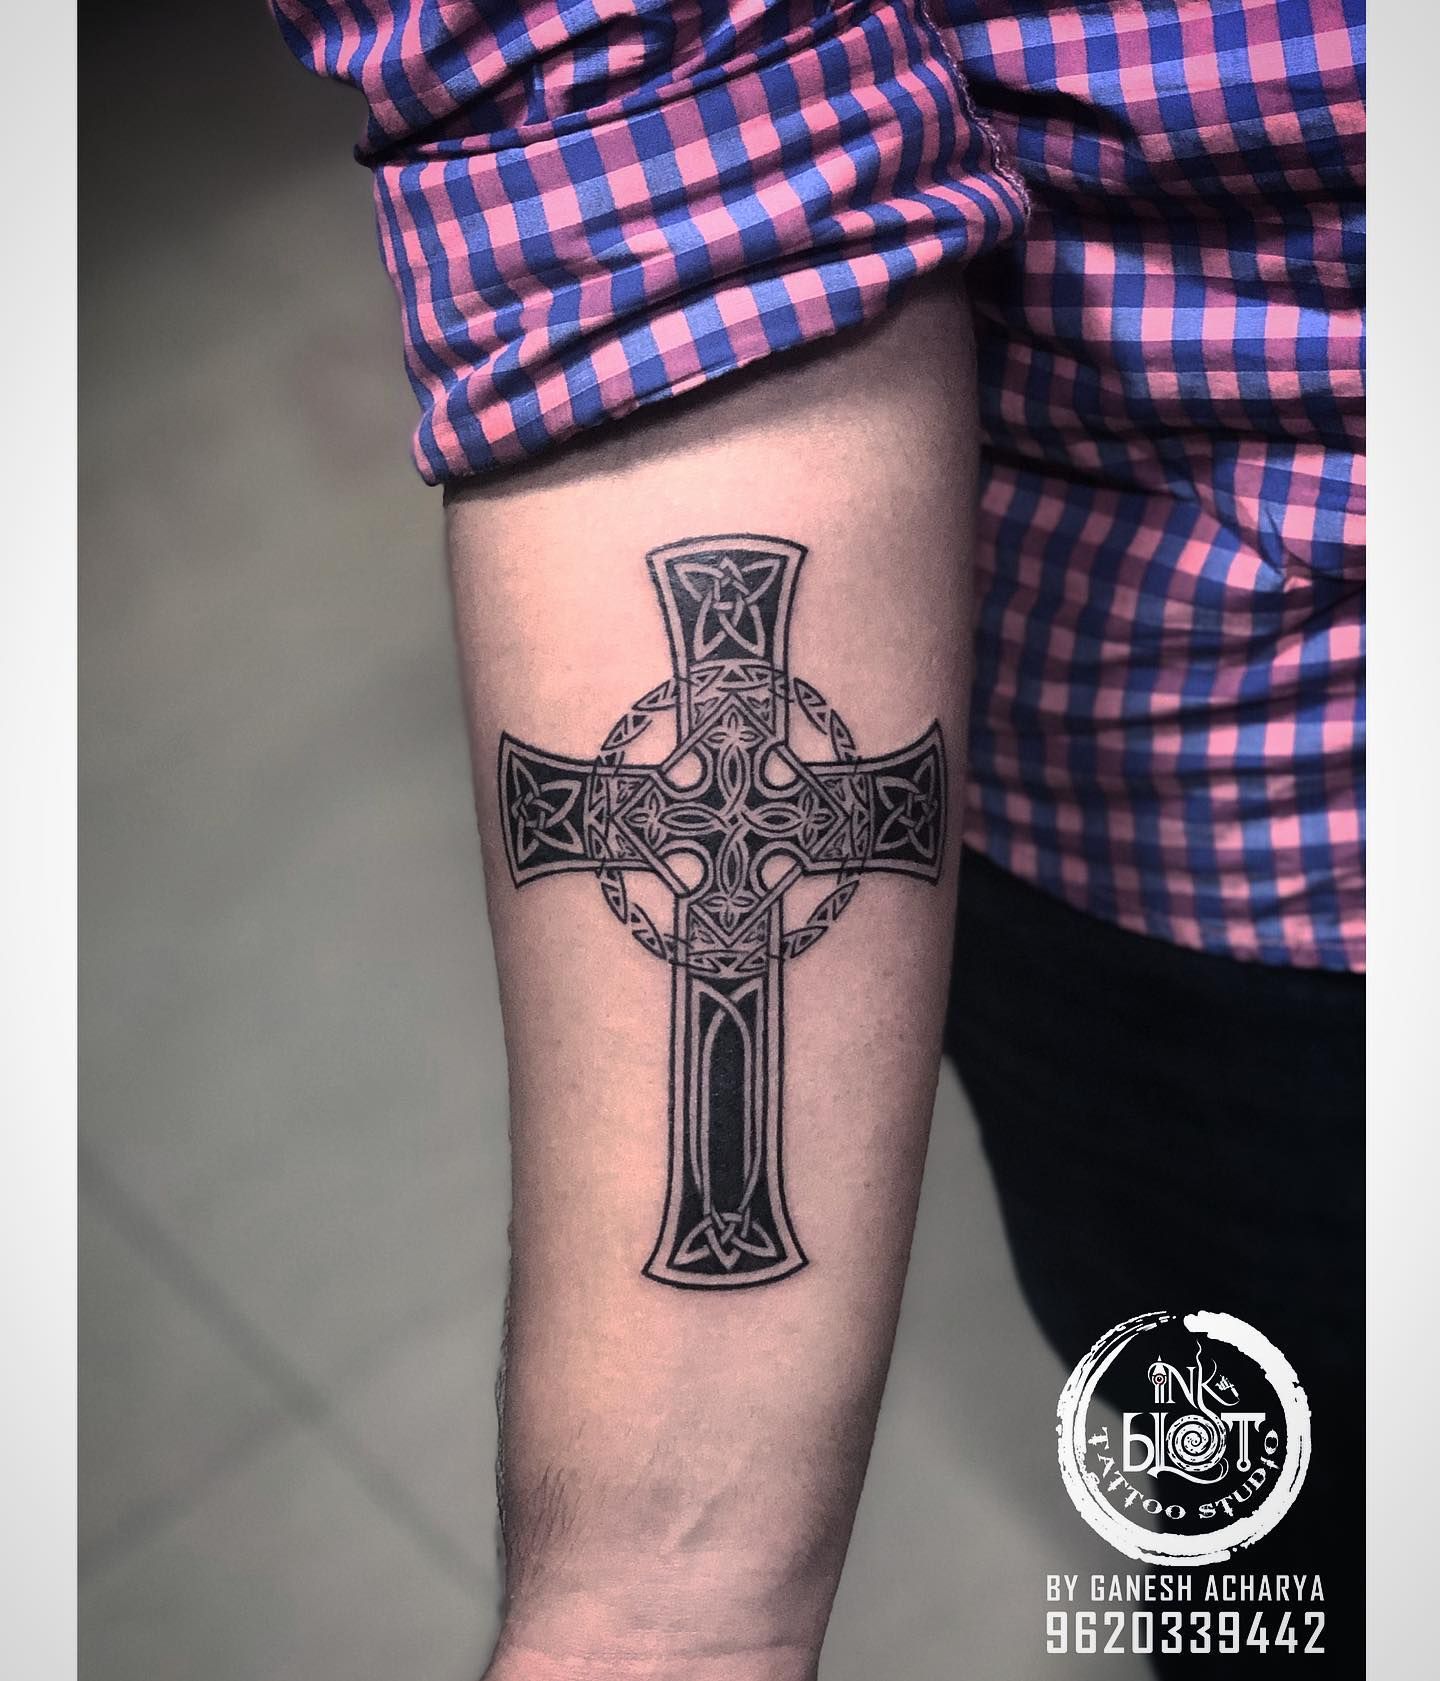 Christian Tattoos for Men  Women  84 Ideas With Sacred Meaning